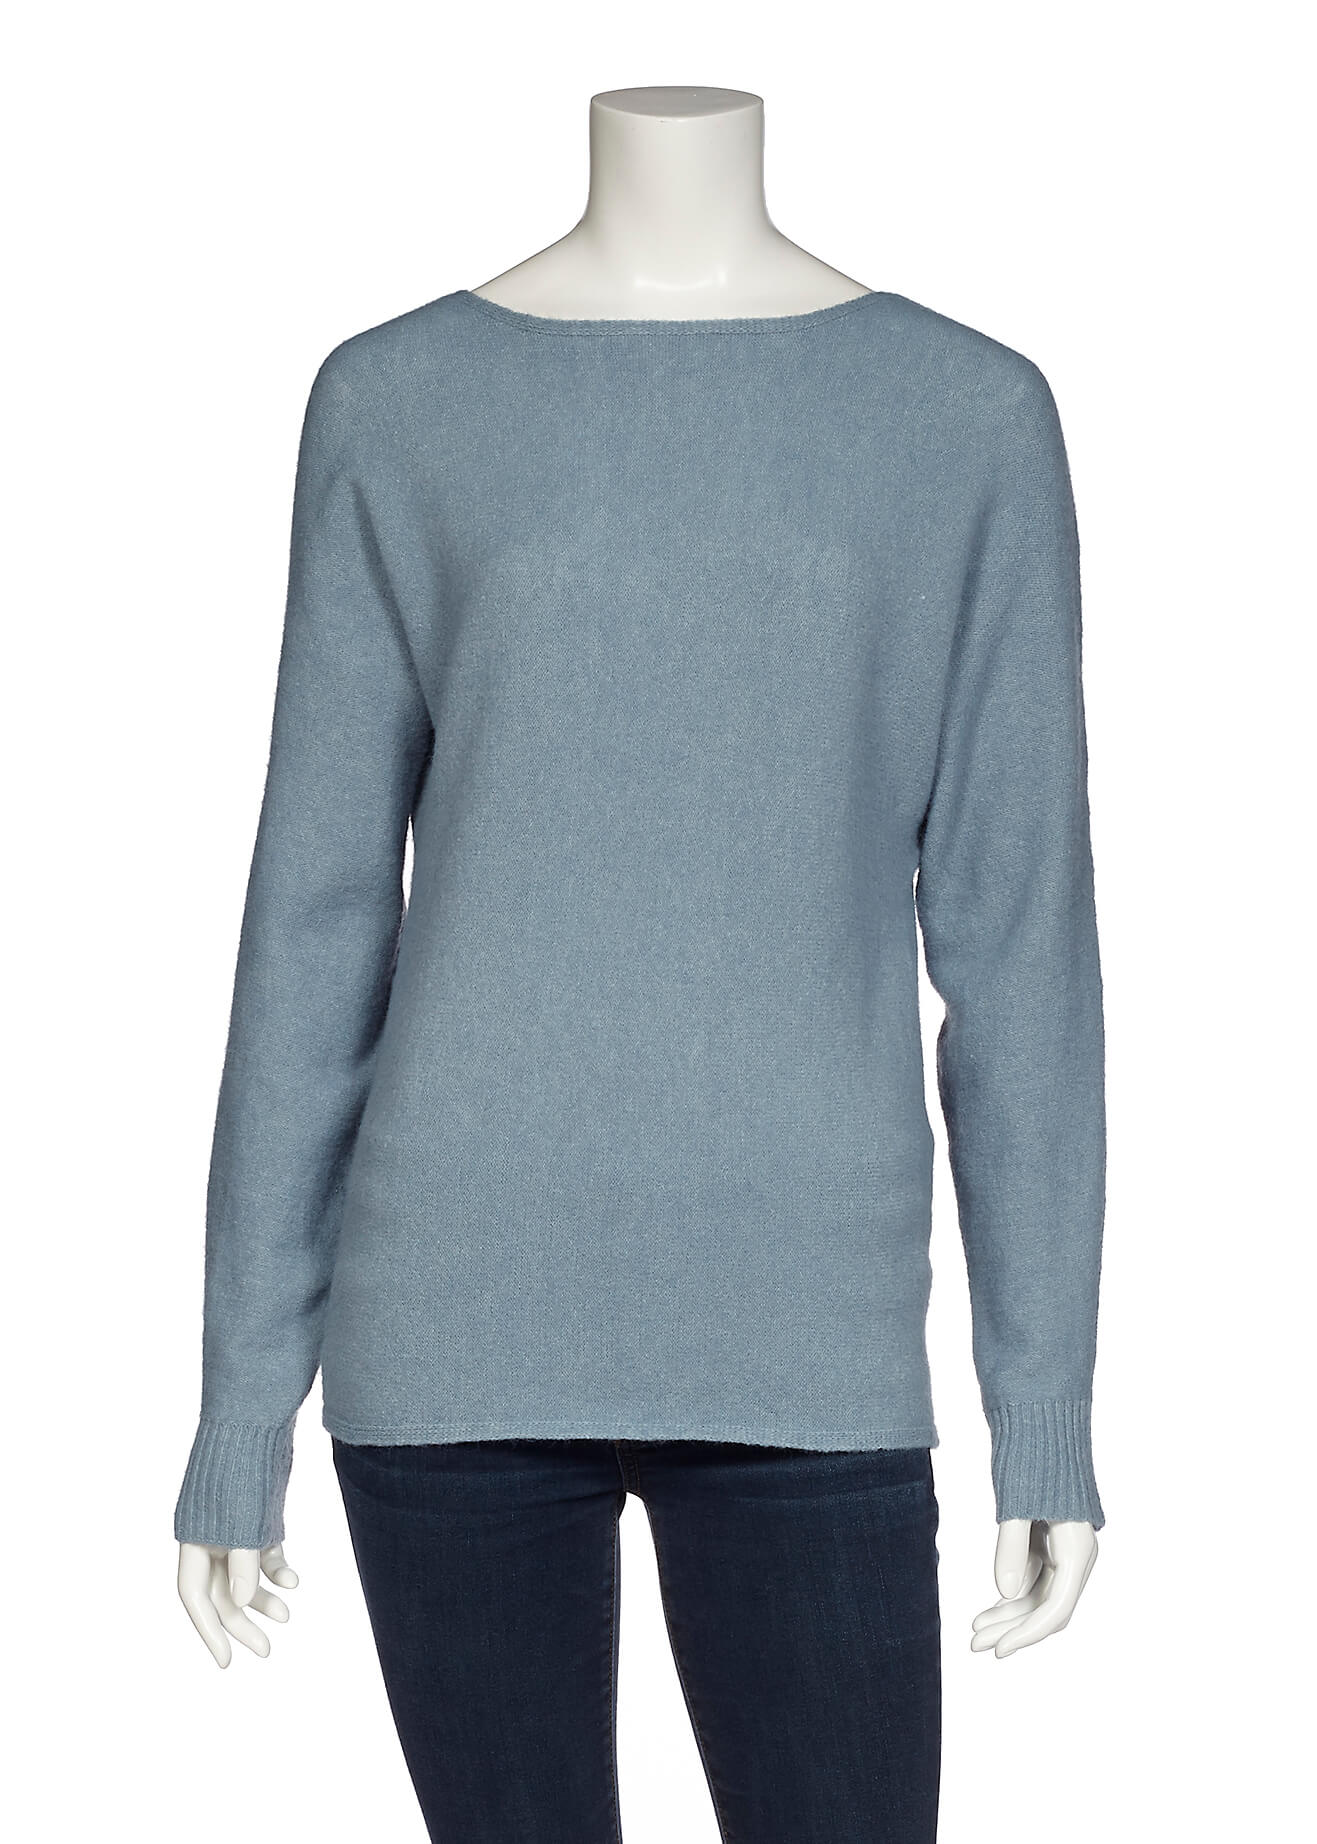 Dolman Long Sleeve Crew Neck Sweater - DKR & Company Apparel / Clothes